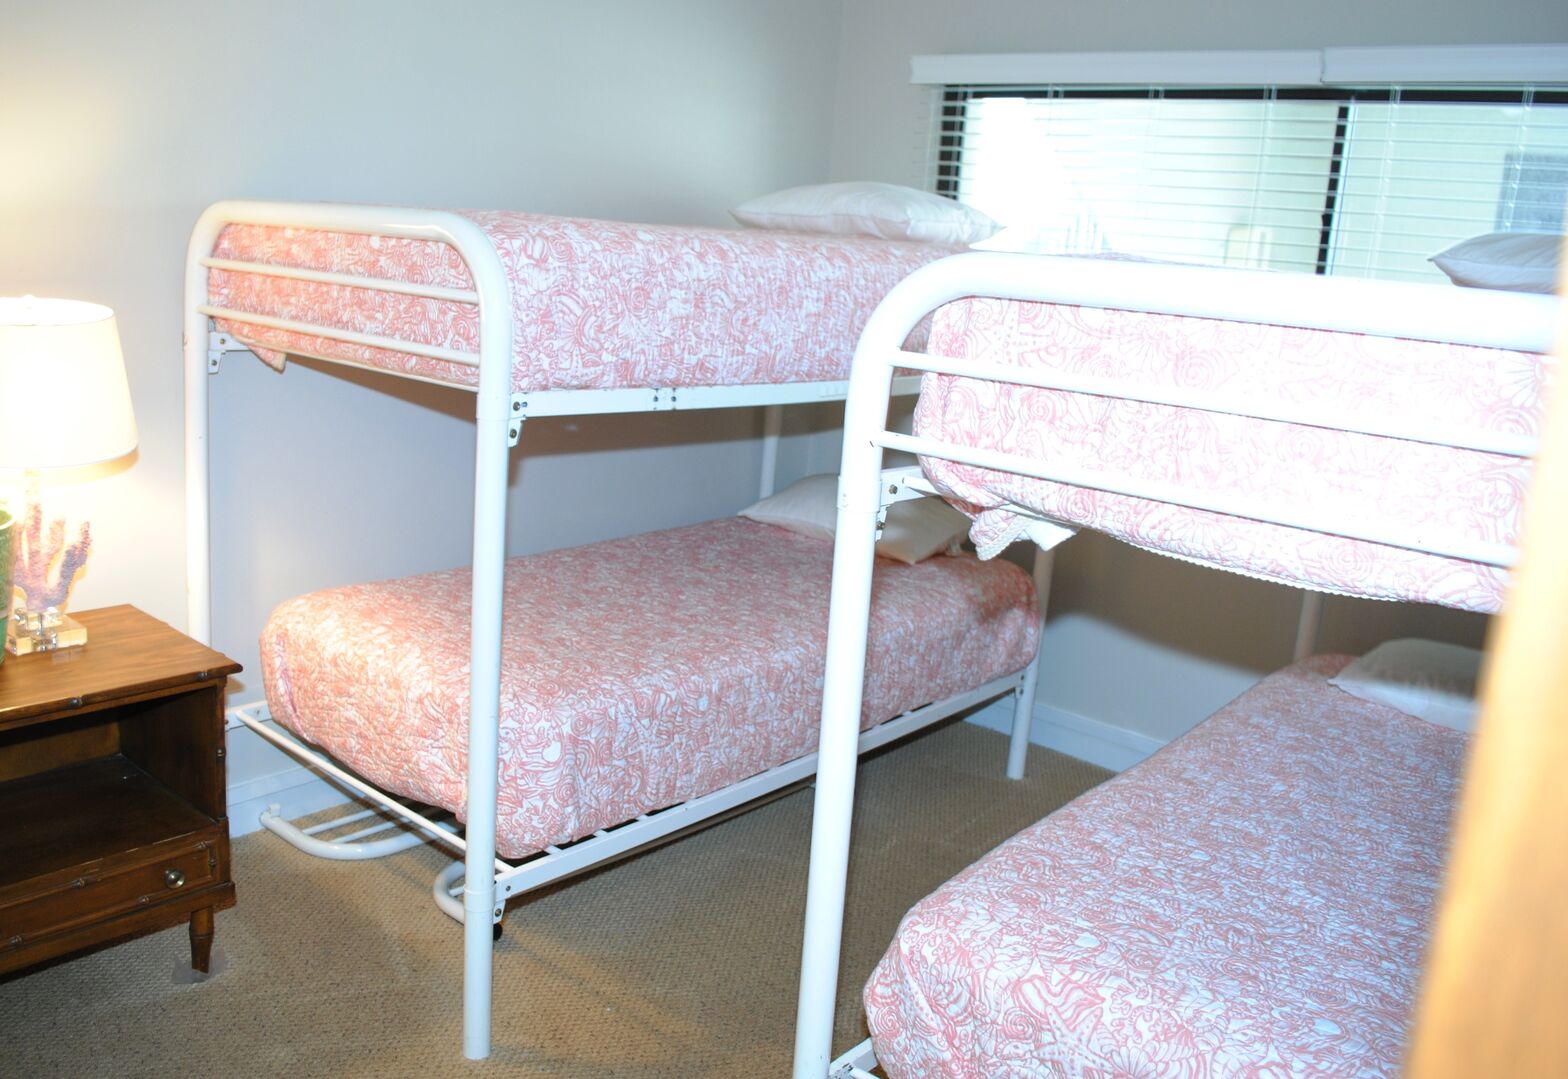 2 Sets of Bunk Beds